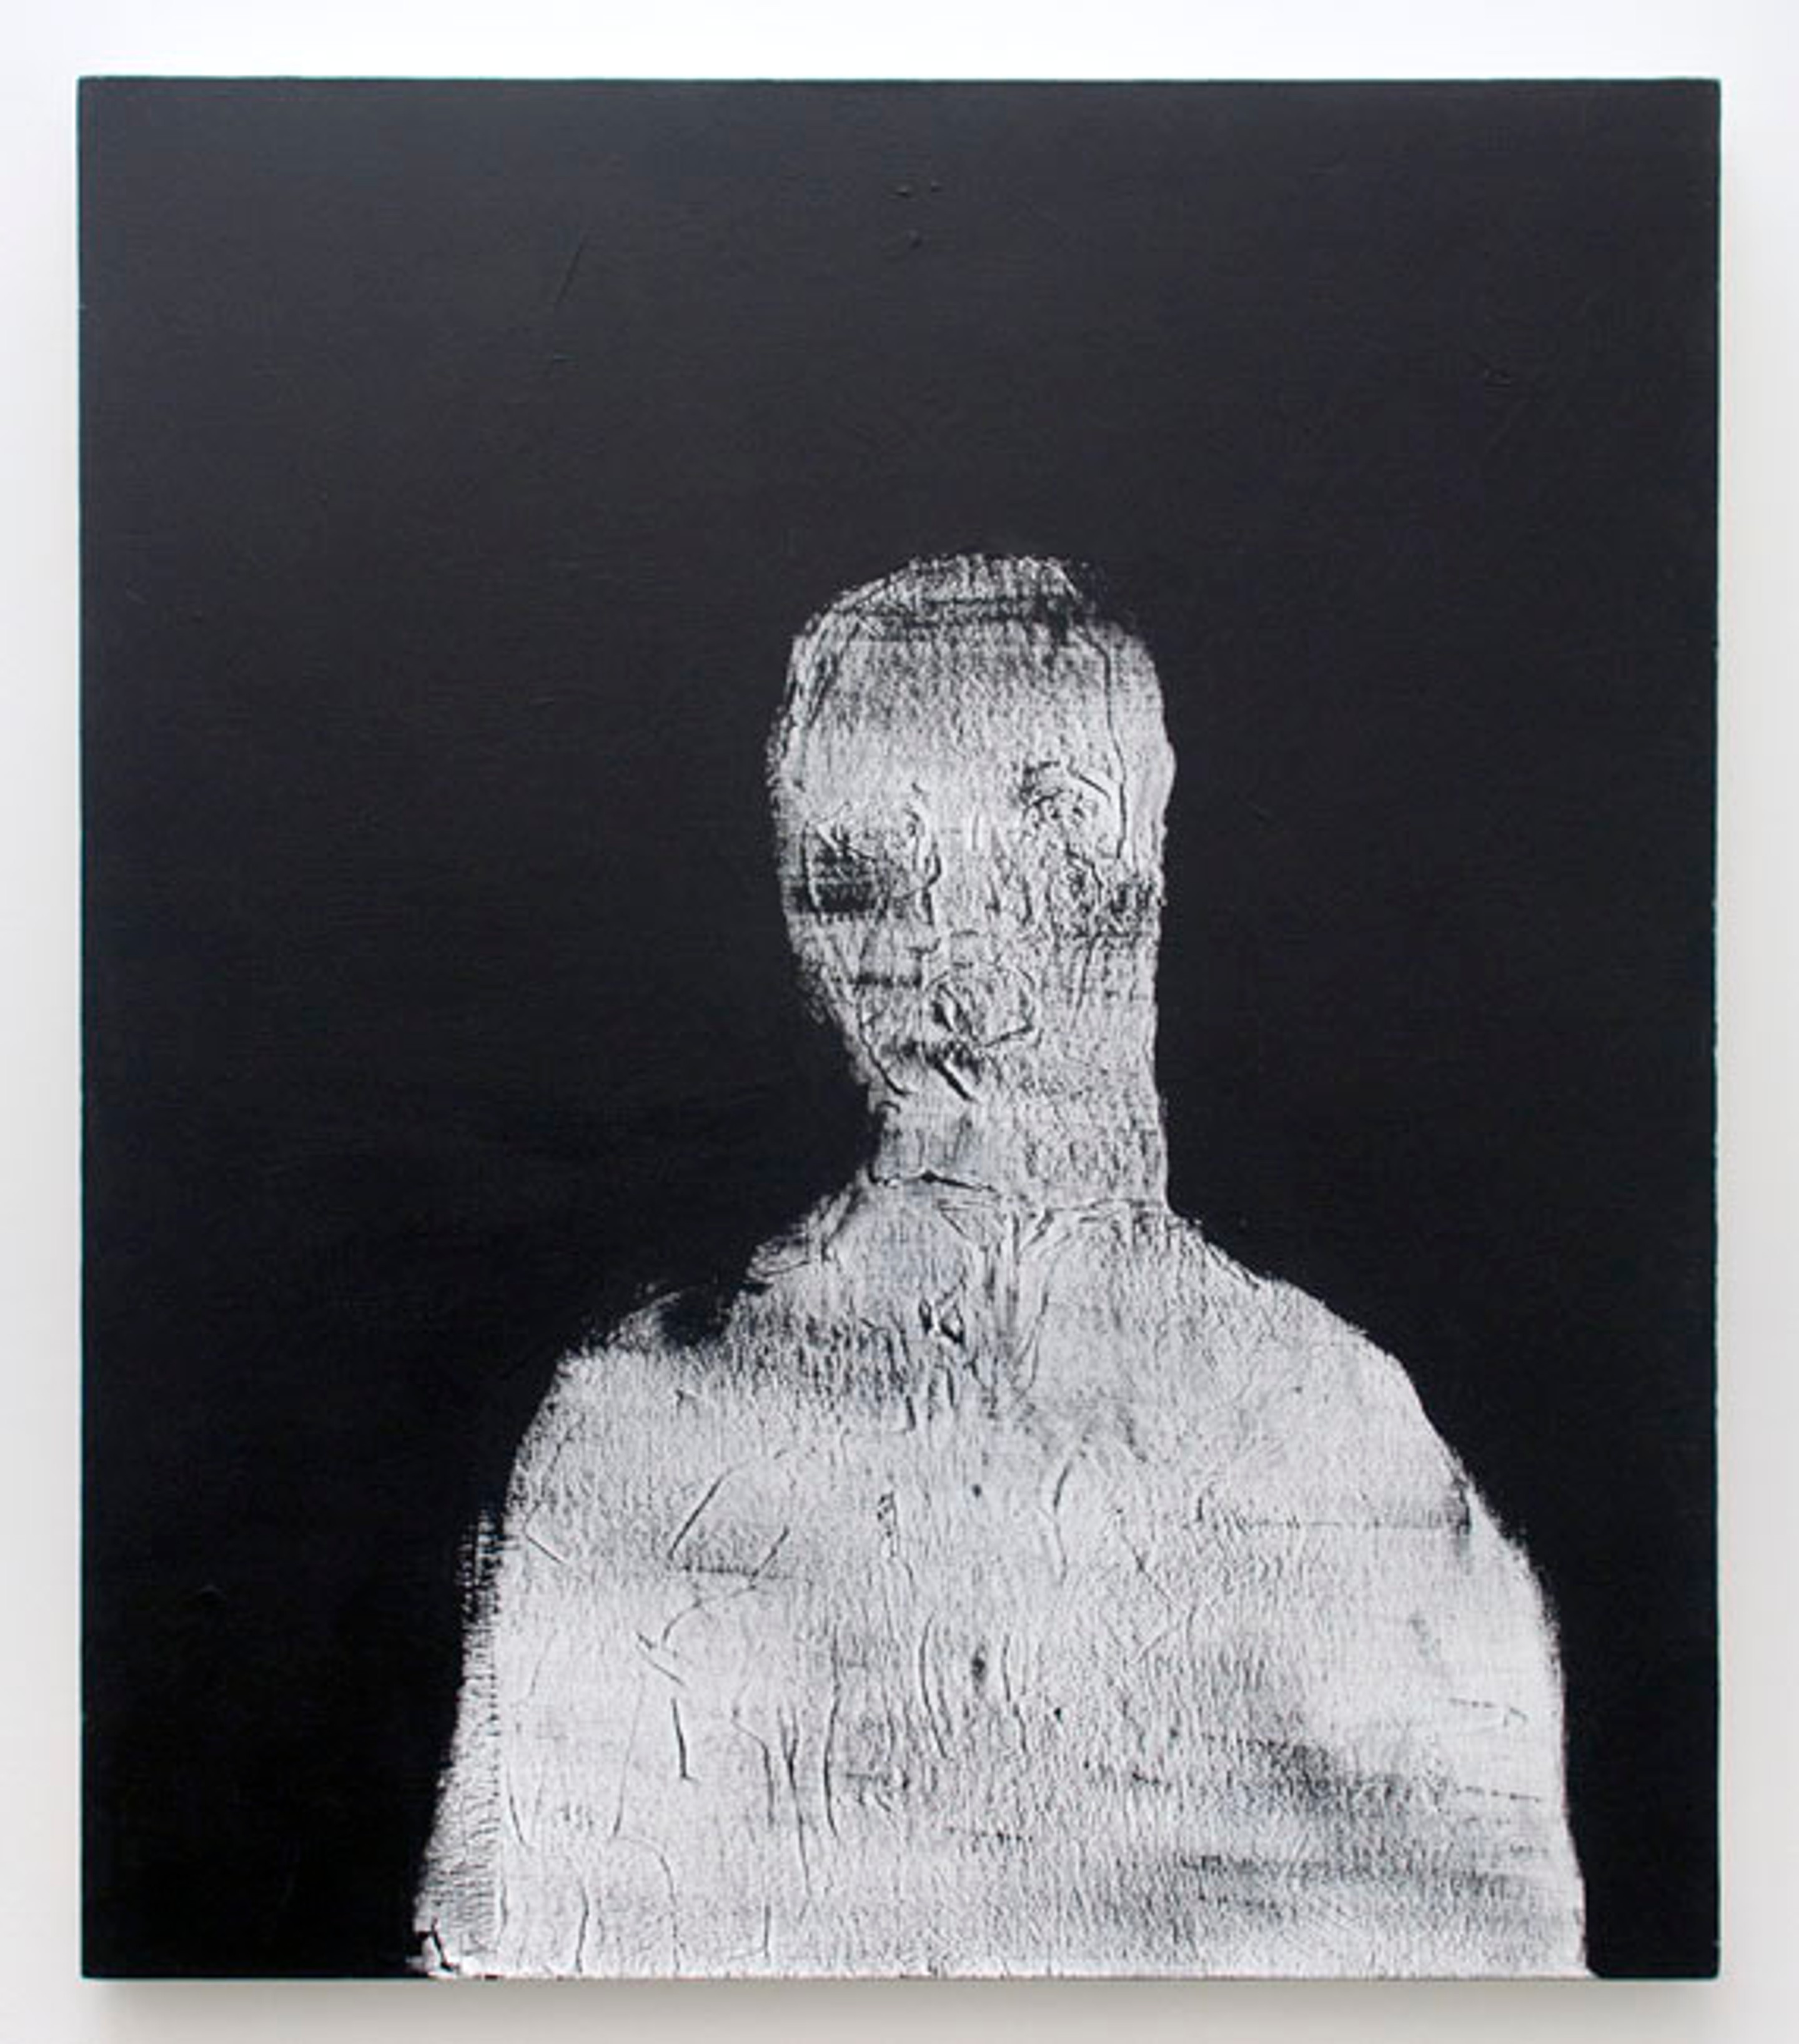 Jamie Fletcher, 1/2 Mensch (2012). Scraped oil and acrylic on canvas